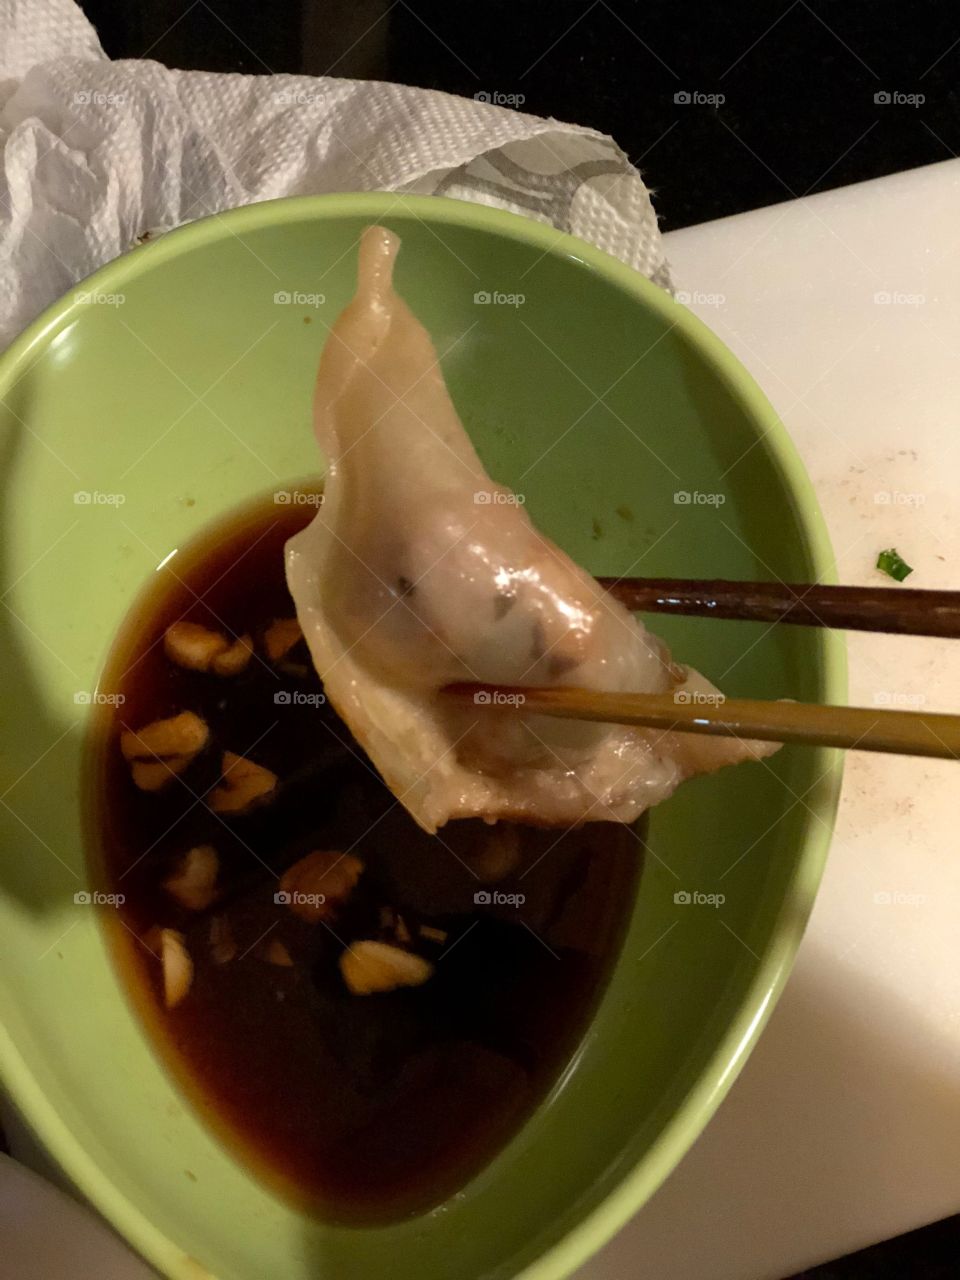 Chopsticks holding a potsticker over a green bowl filled with soy sauce and garlic pieces. 